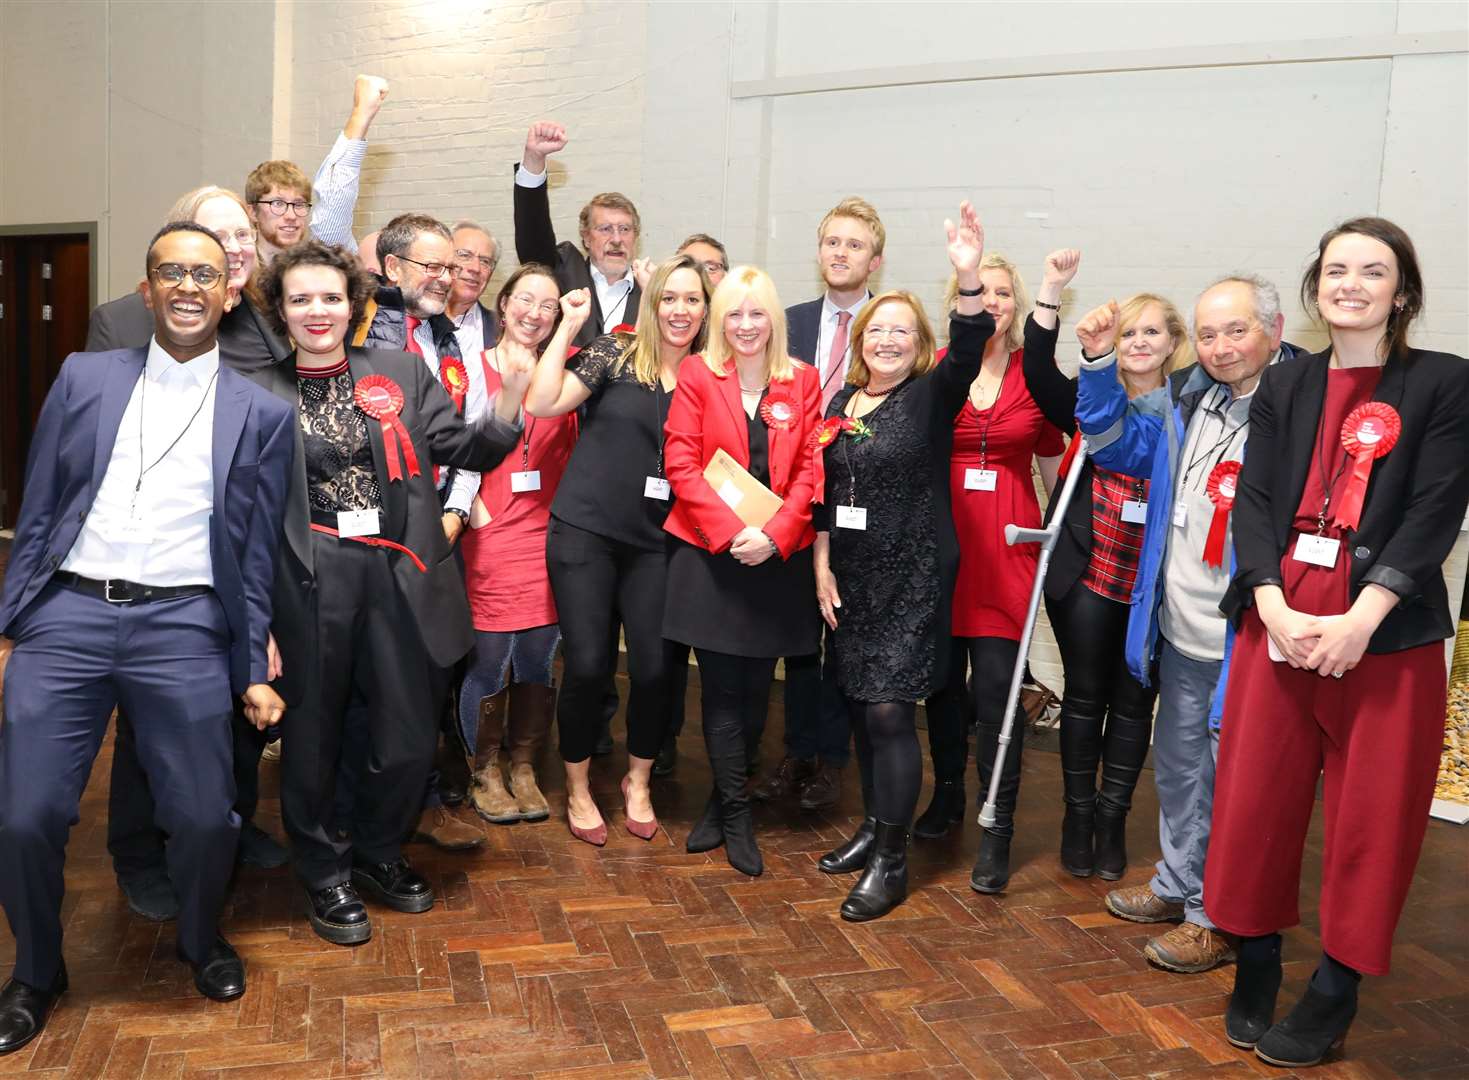 Rosie Duffield and her team celebrate victory at the 2019 General Election